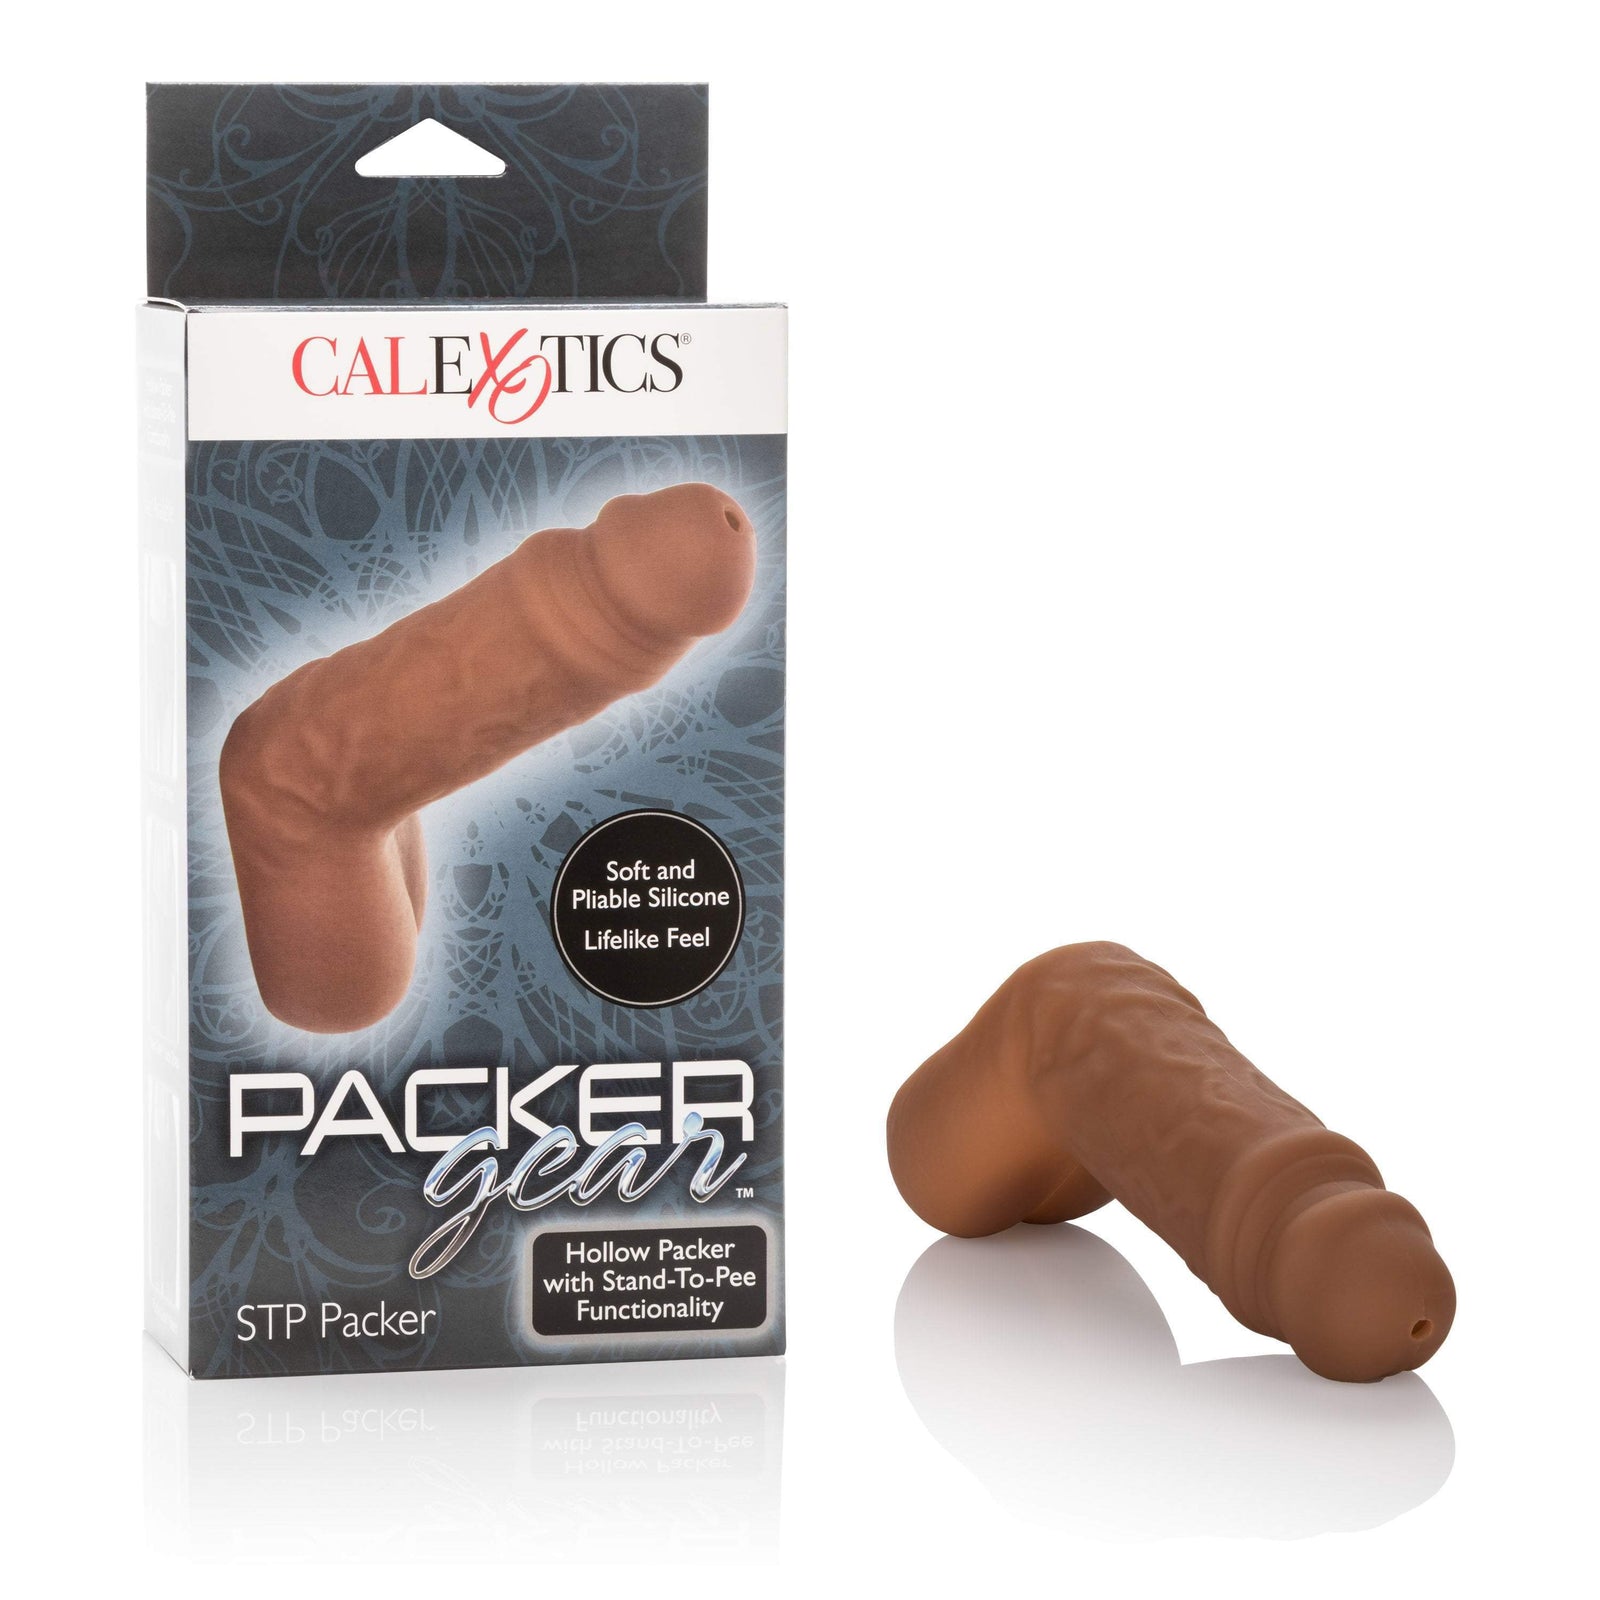 California Exotics - Packer Gear STP Hollow Packer (Brown) Strap On with Hollow Dildo for Male (Non Vibration) Durio Asia